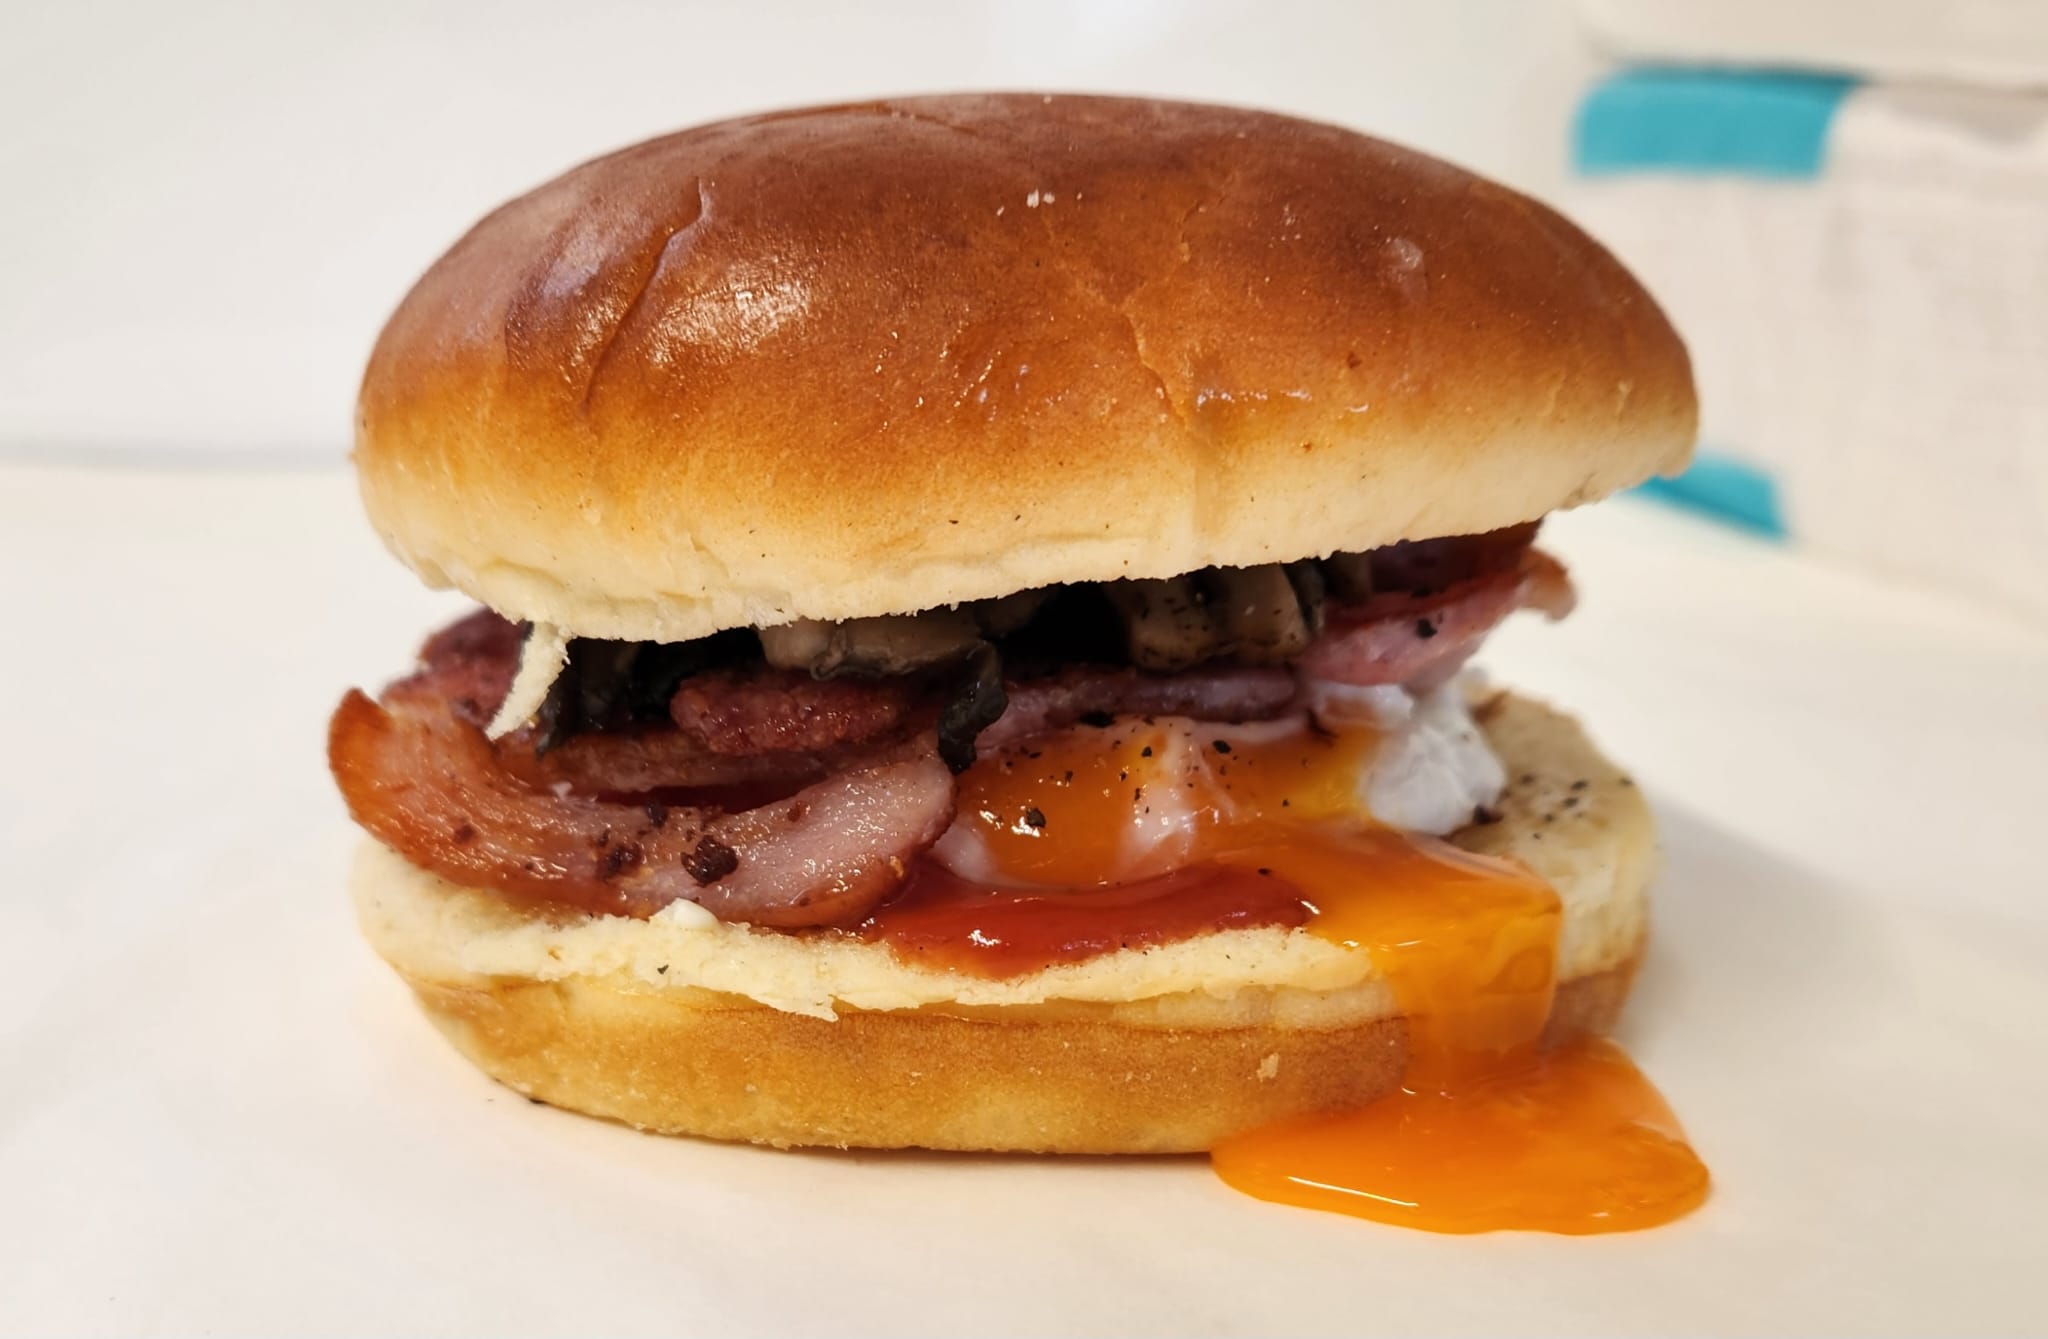 Bacon, mushroom & egg bap - made using the finest ingredients which are locally sourced.